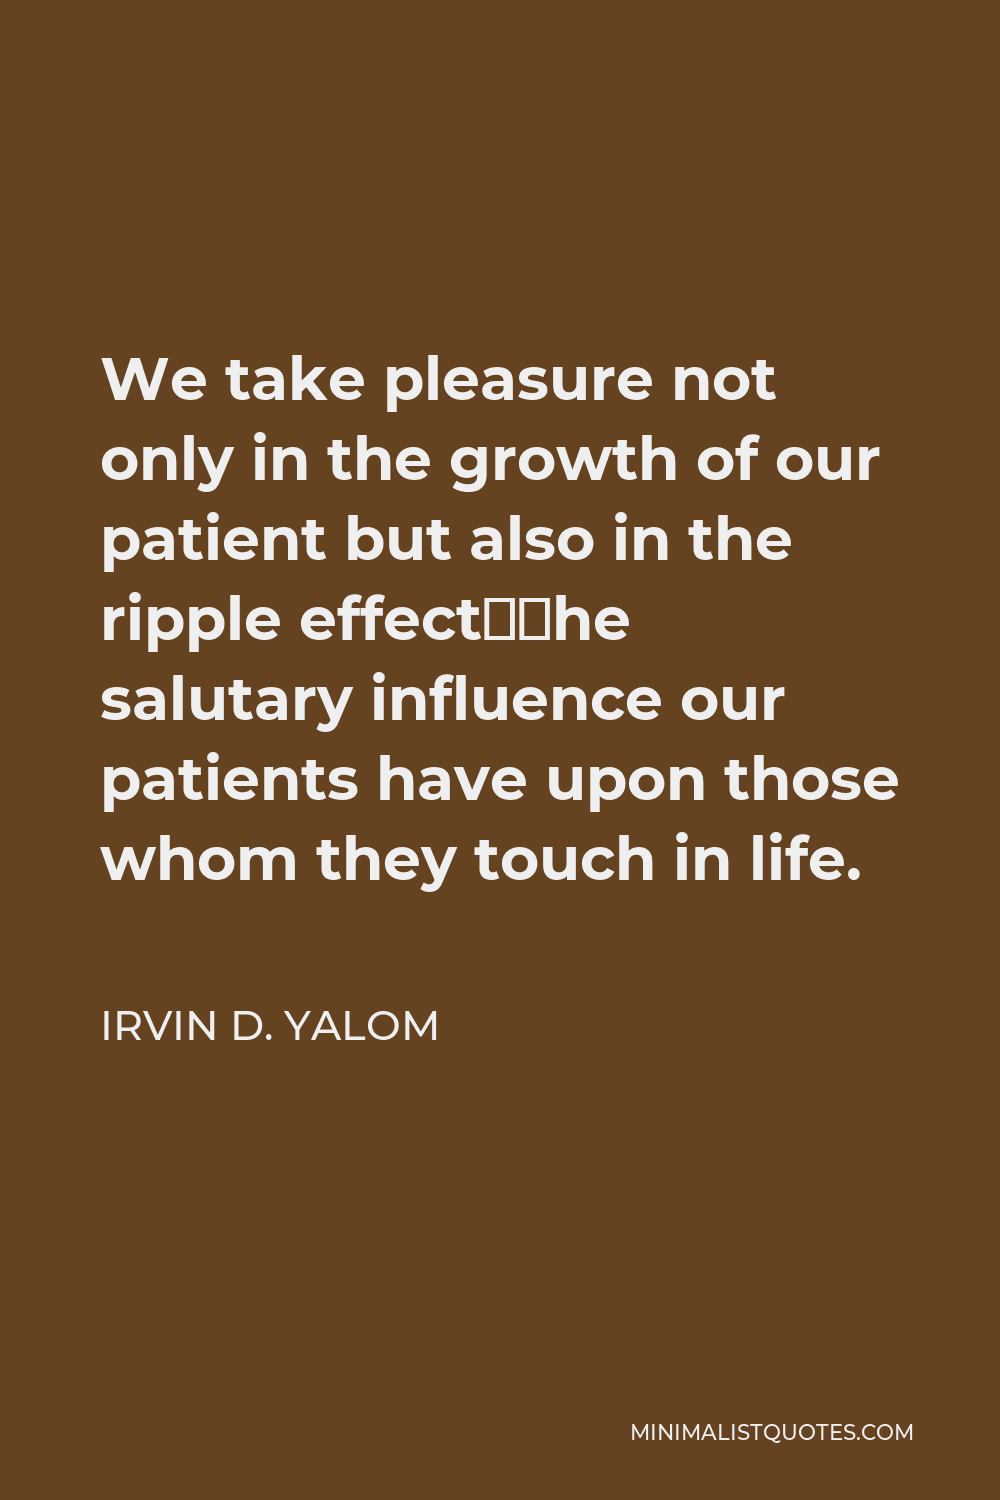 Irvin D. Yalom Quote - We take pleasure not only in the growth of our patient but also in the ripple effect—the salutary influence our patients have upon those whom they touch in life.